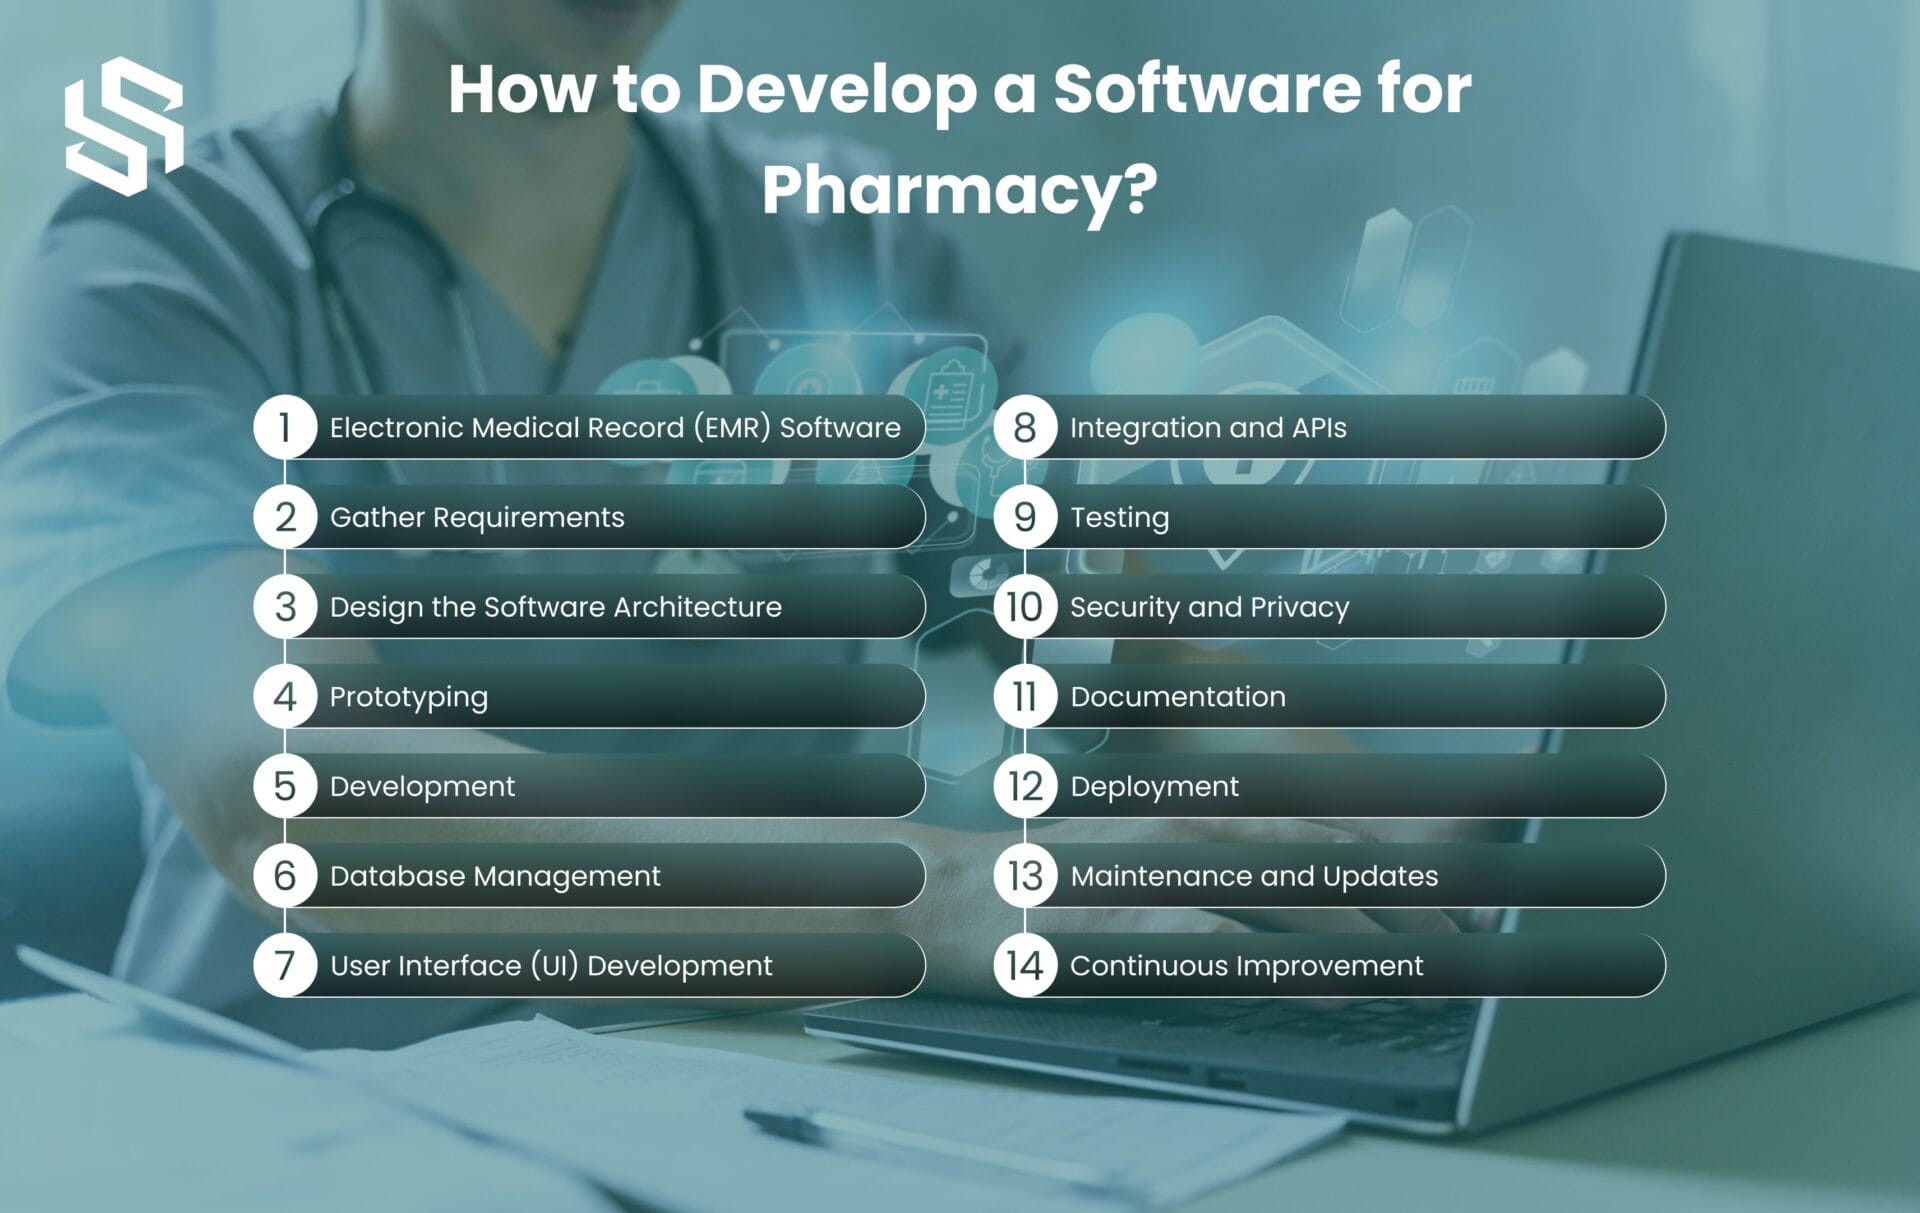 How to develop a software for pharmacy